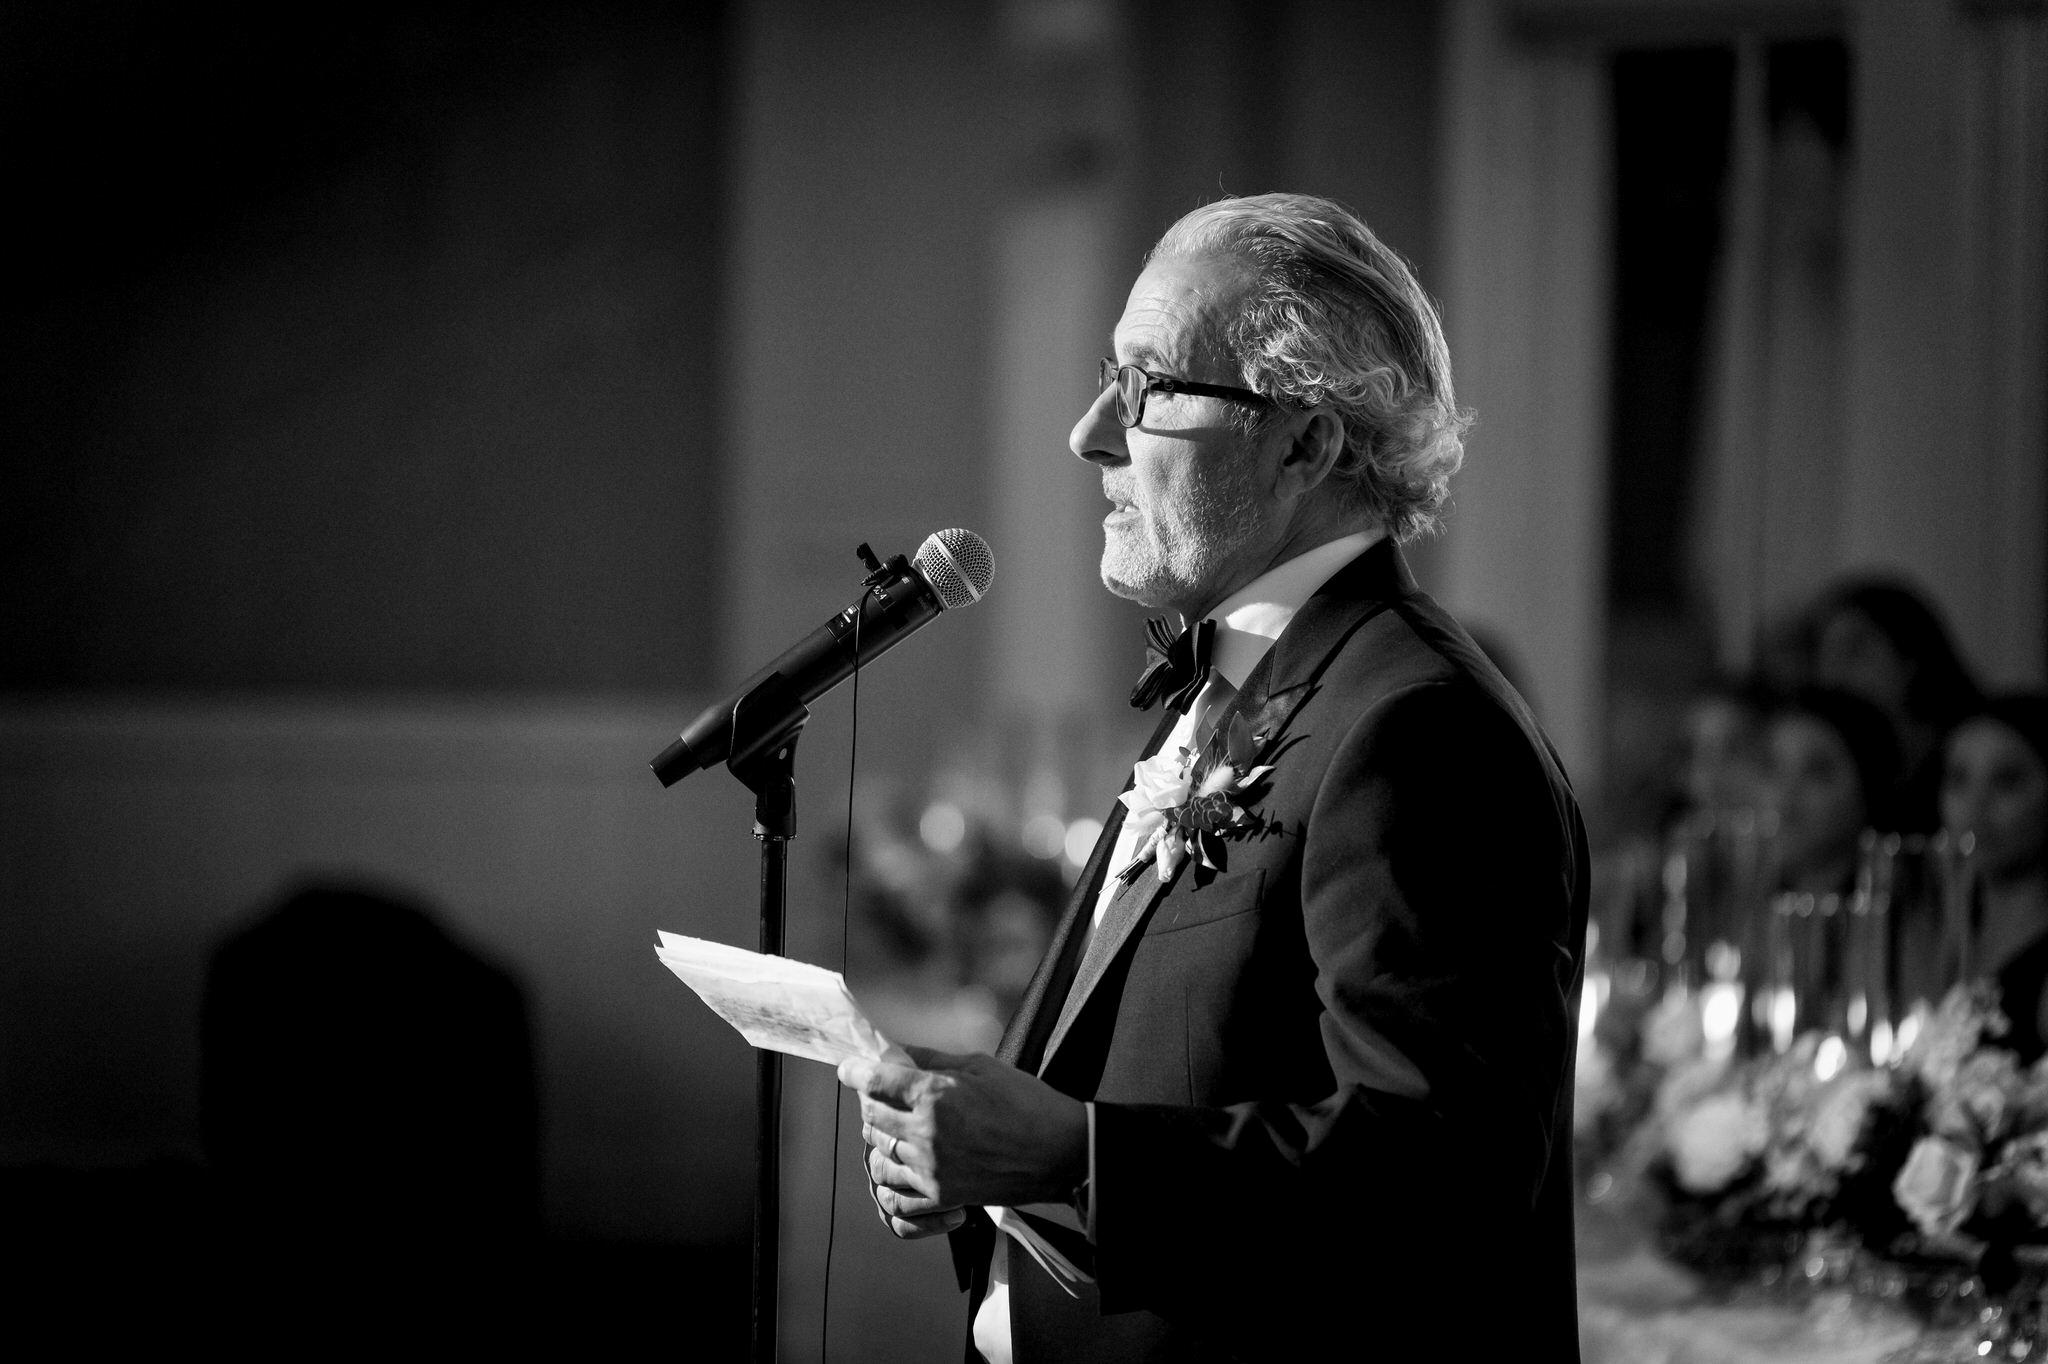 The father of the groom gives a speech while wearing a tuxedo. 